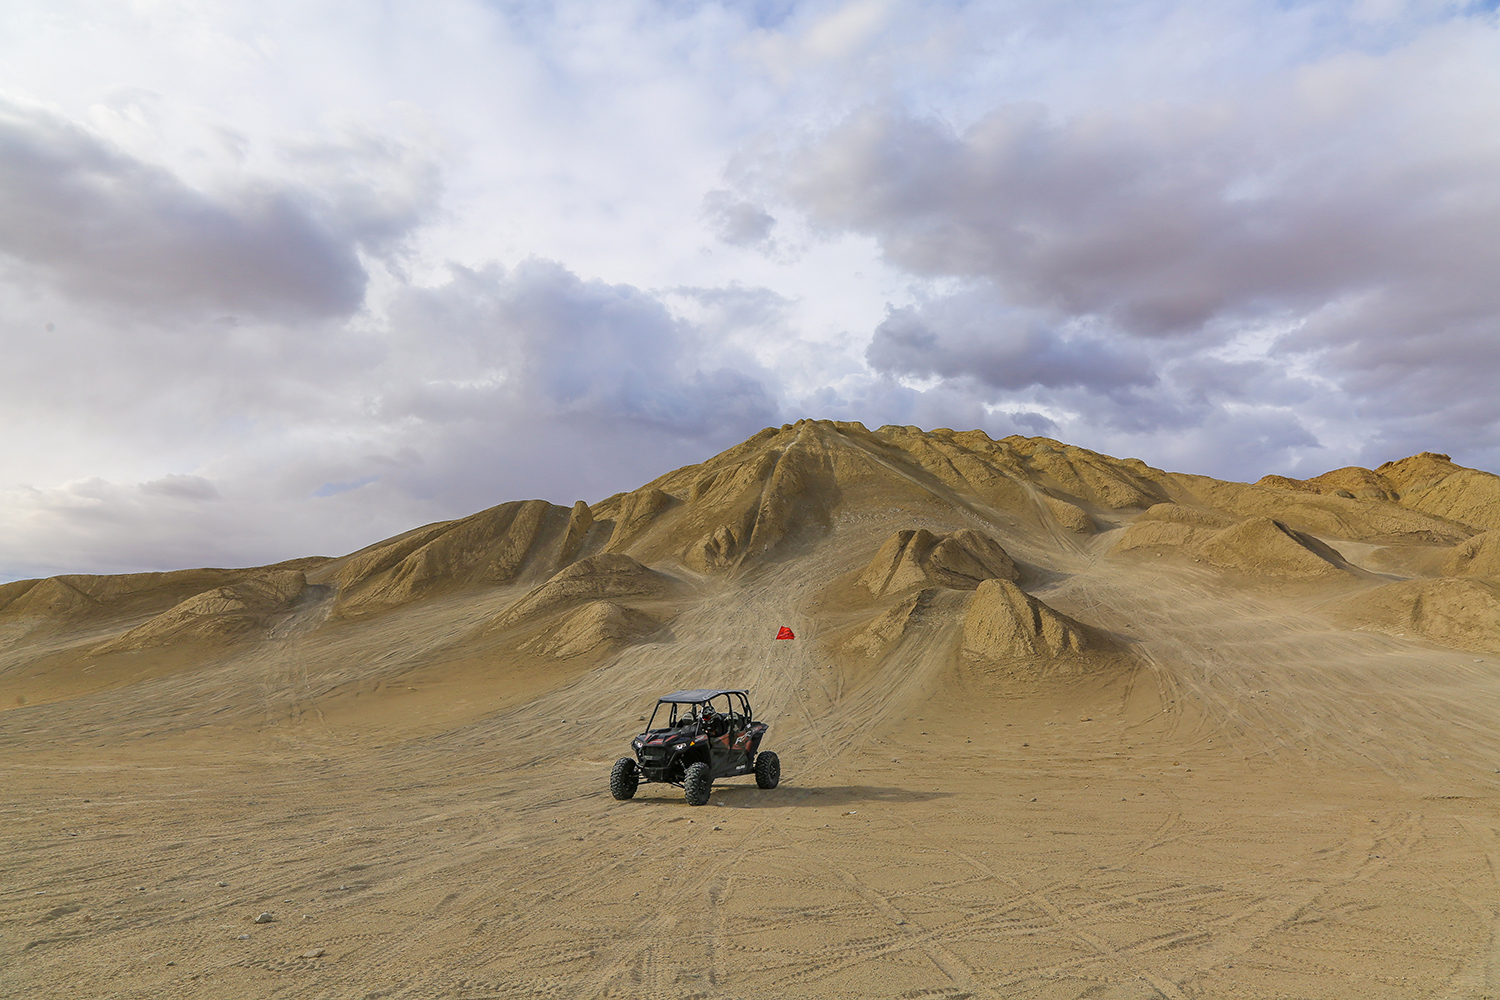 Photo of a black off-roading vehicle called an OHV buggy parked against a hilly desert terrain course near Borrego Springs, California.